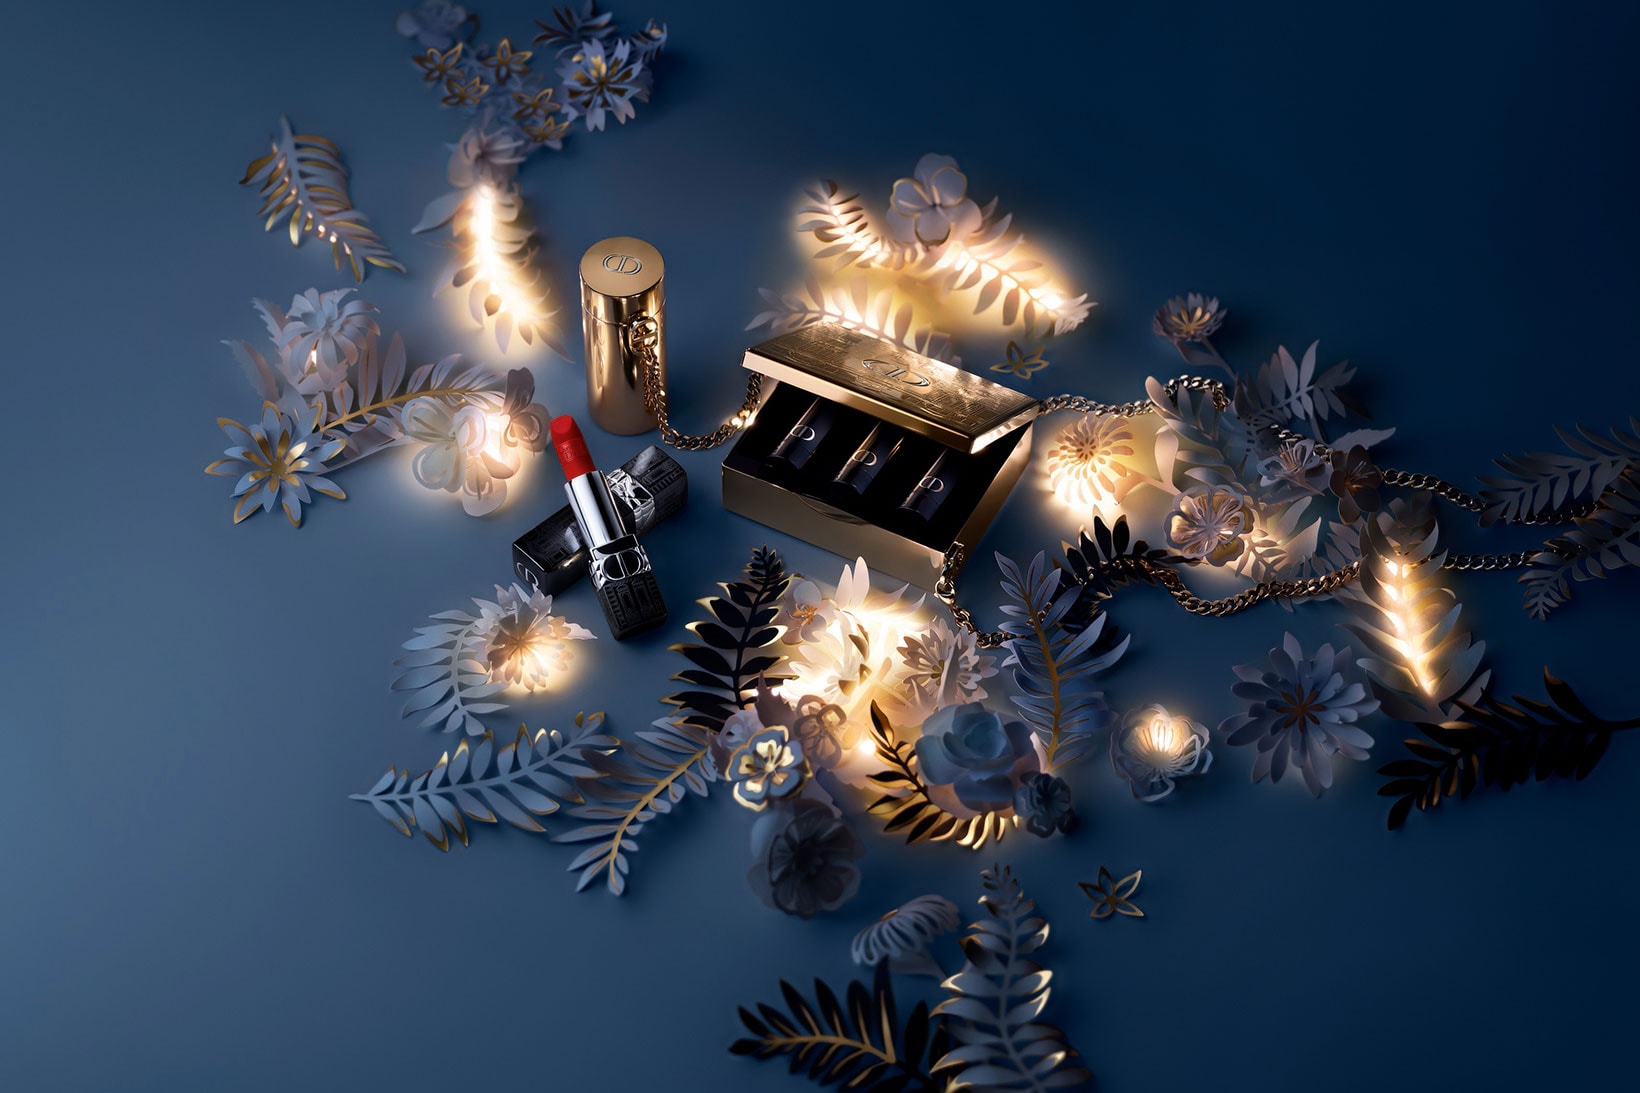 Dream in Dior Beauty this Holiday